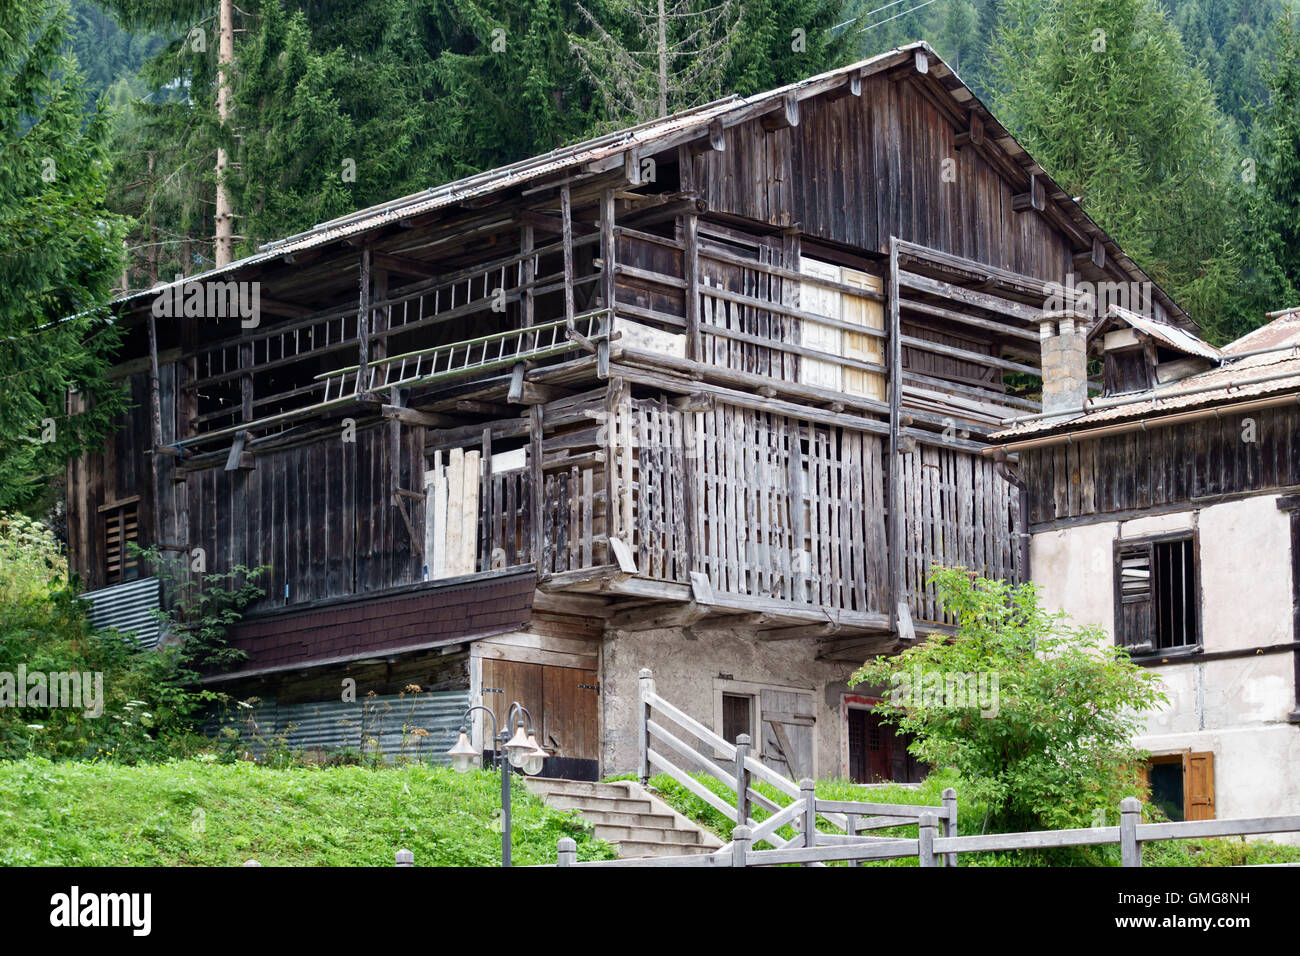 The Dolomites, Trentino, northern Italy. A traditional old wooden barn in the mountain village of Falcade Stock Photo